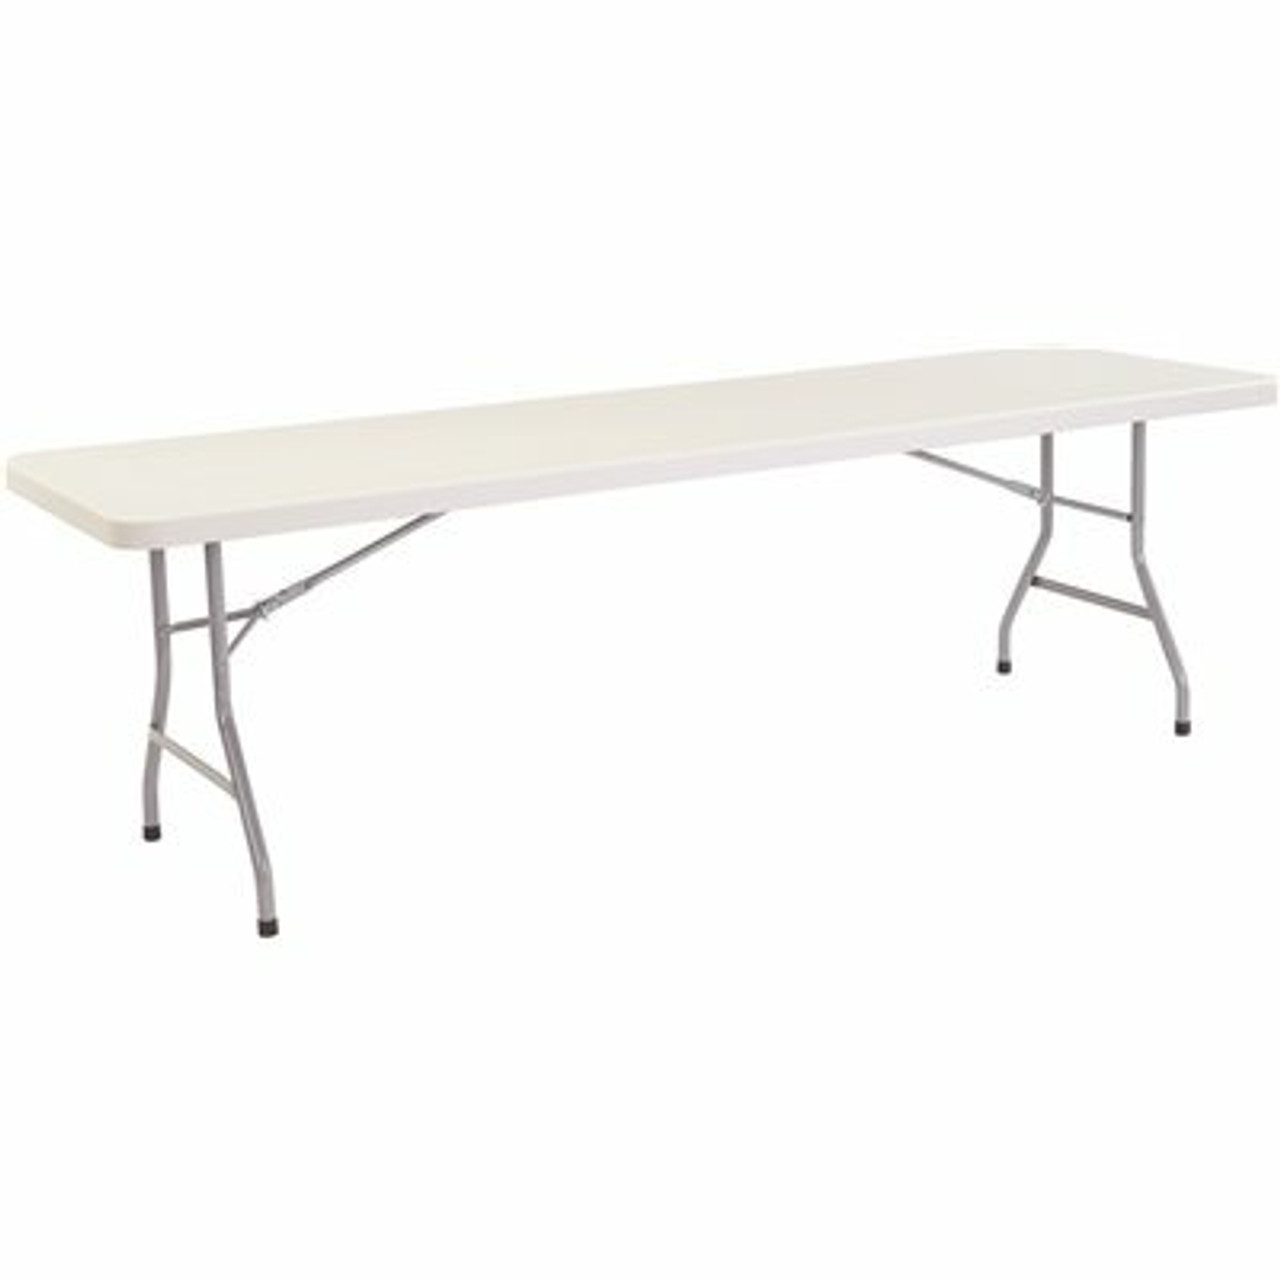 National Public Seating 96 In. Grey Plastic Folding Banquet Table